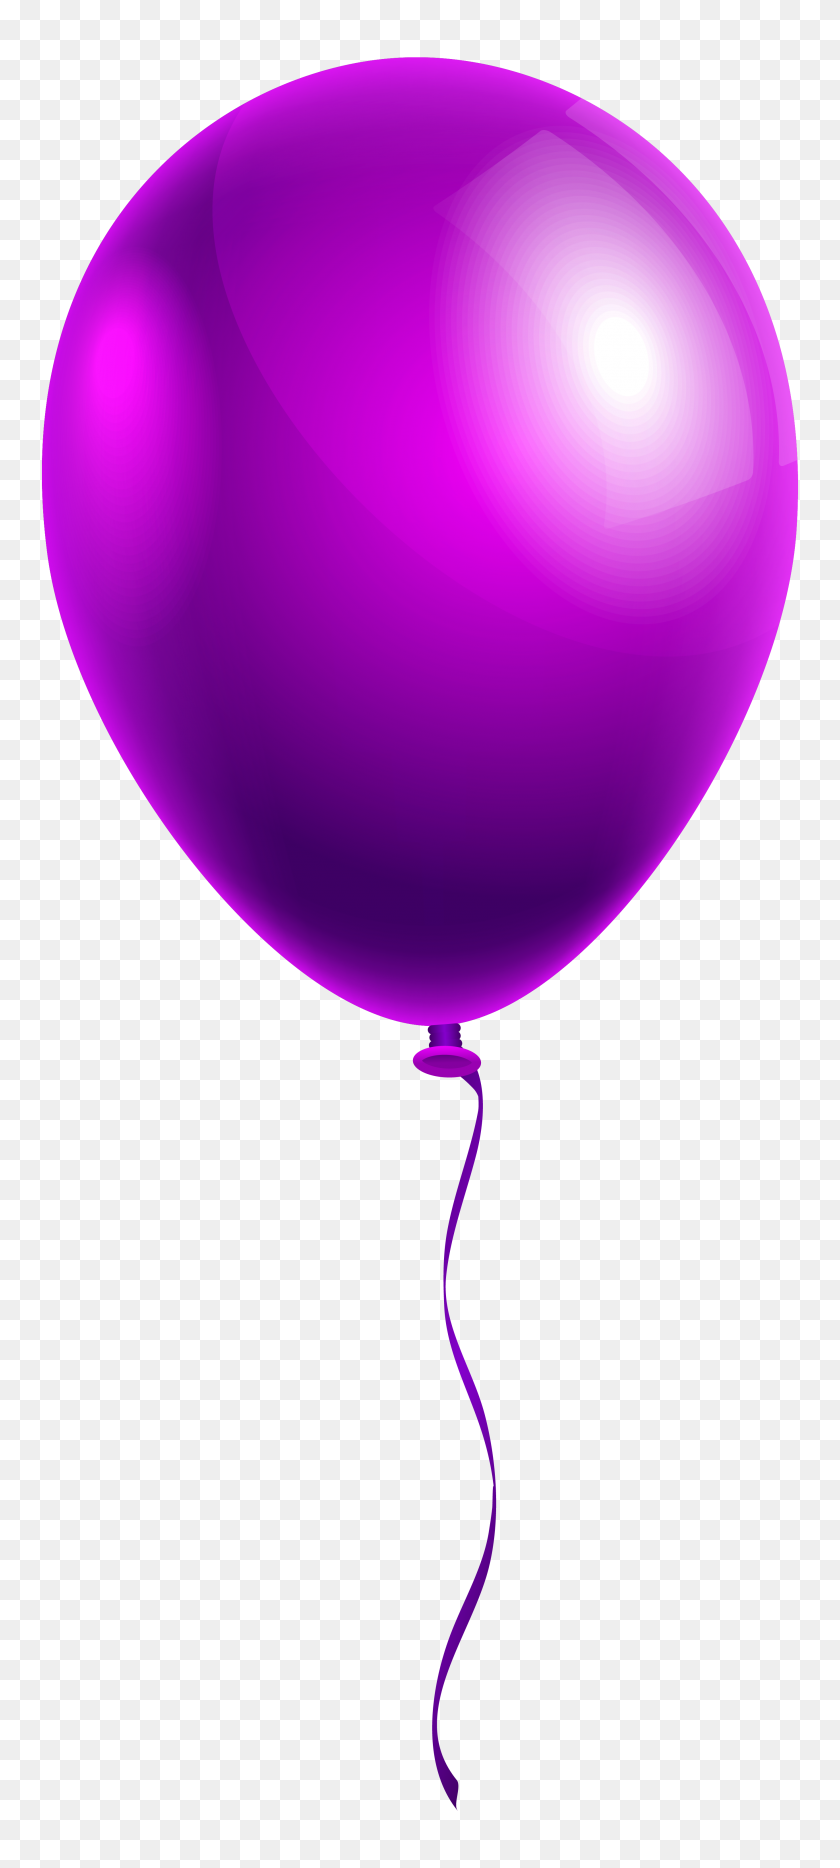 2743x6361 In Balloons, Purple - Daylight Savings Time 2018 Clipart